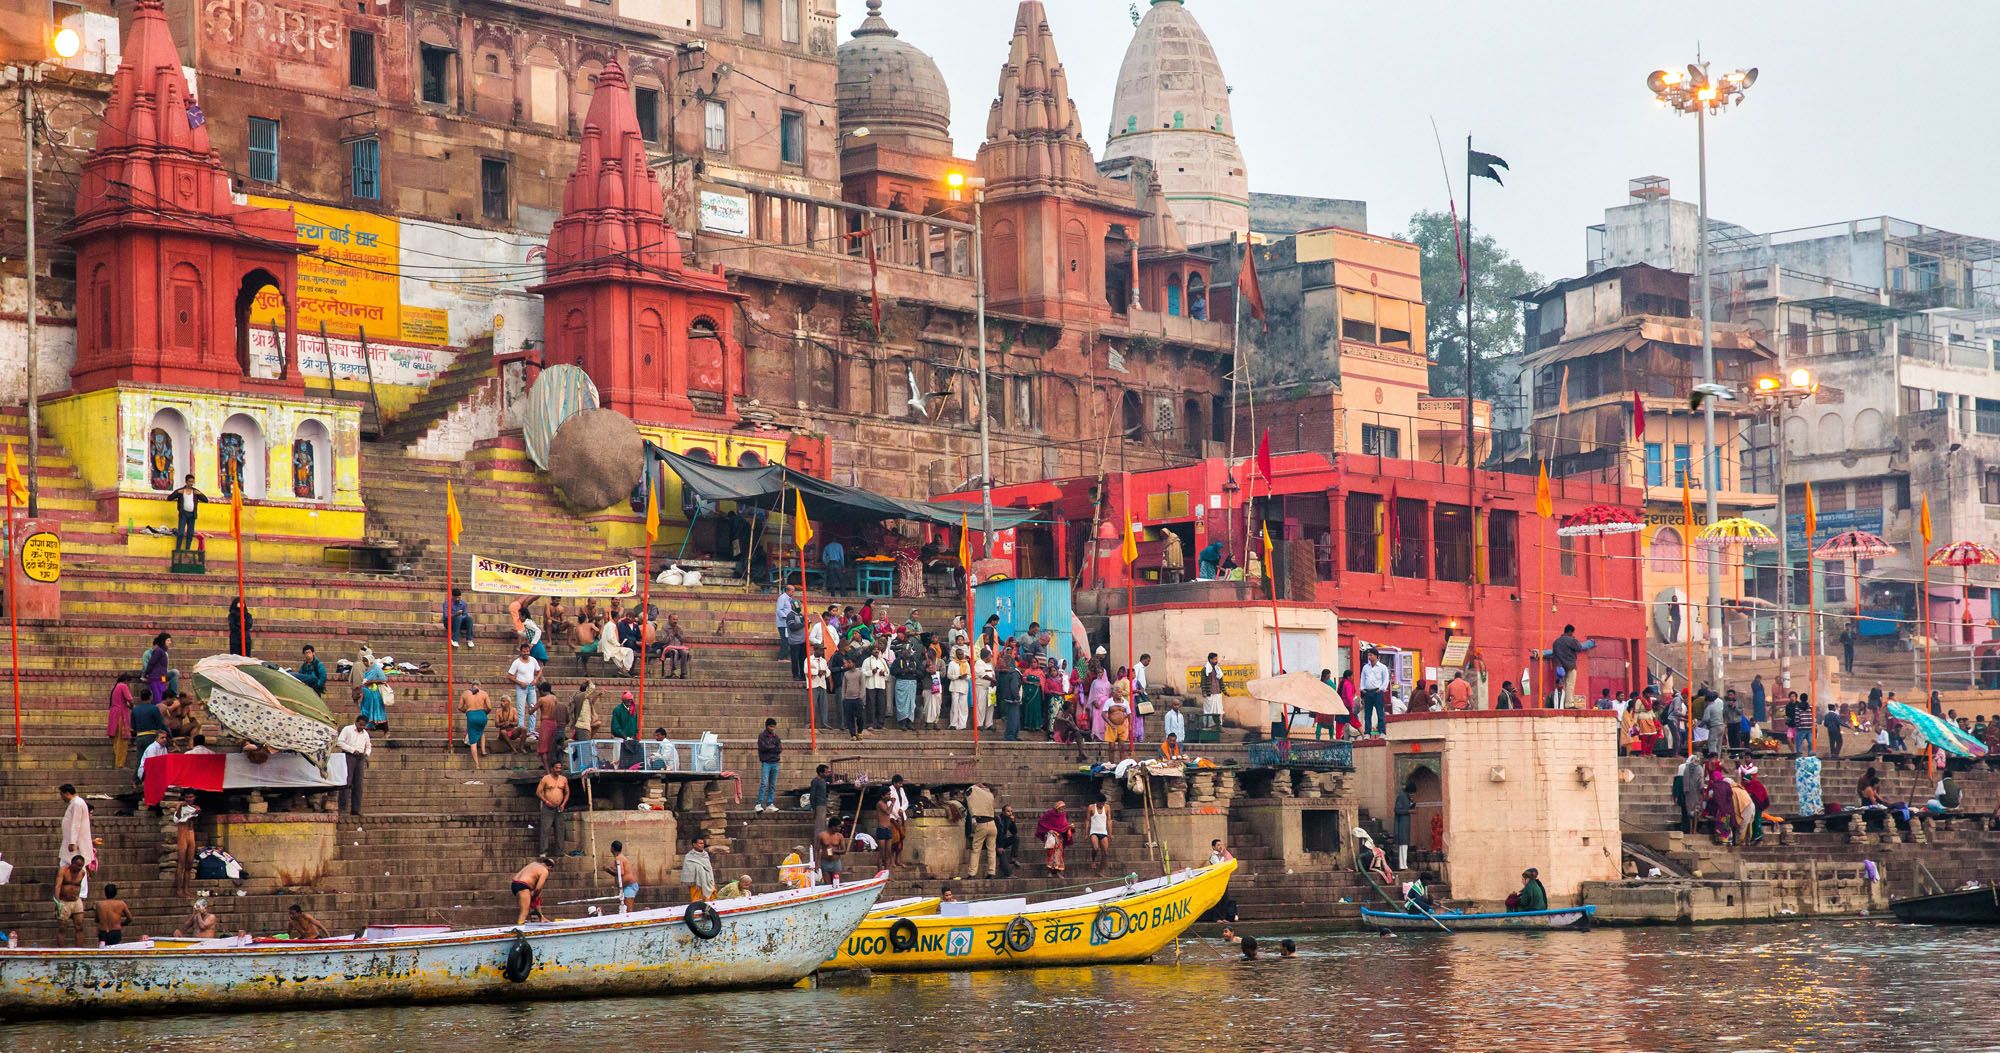 Featured image for “Varanasi, India’s Holiest City”